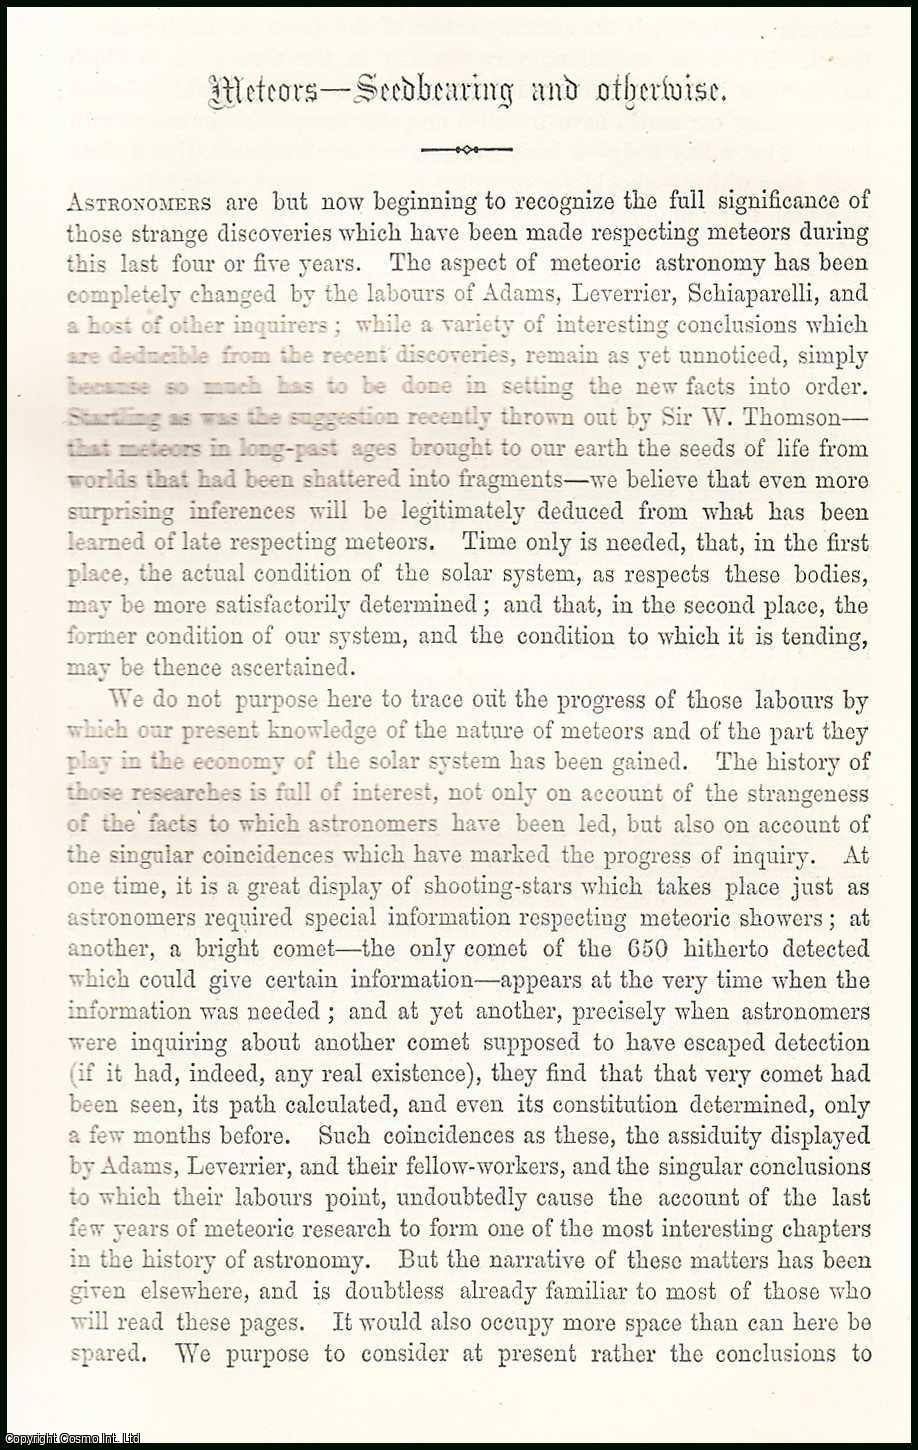 R.A. Proctor - Astronomy : Meteors - Seedbearing and Otherwise. An uncommon original article from the Cornhill Magazine, 1872.